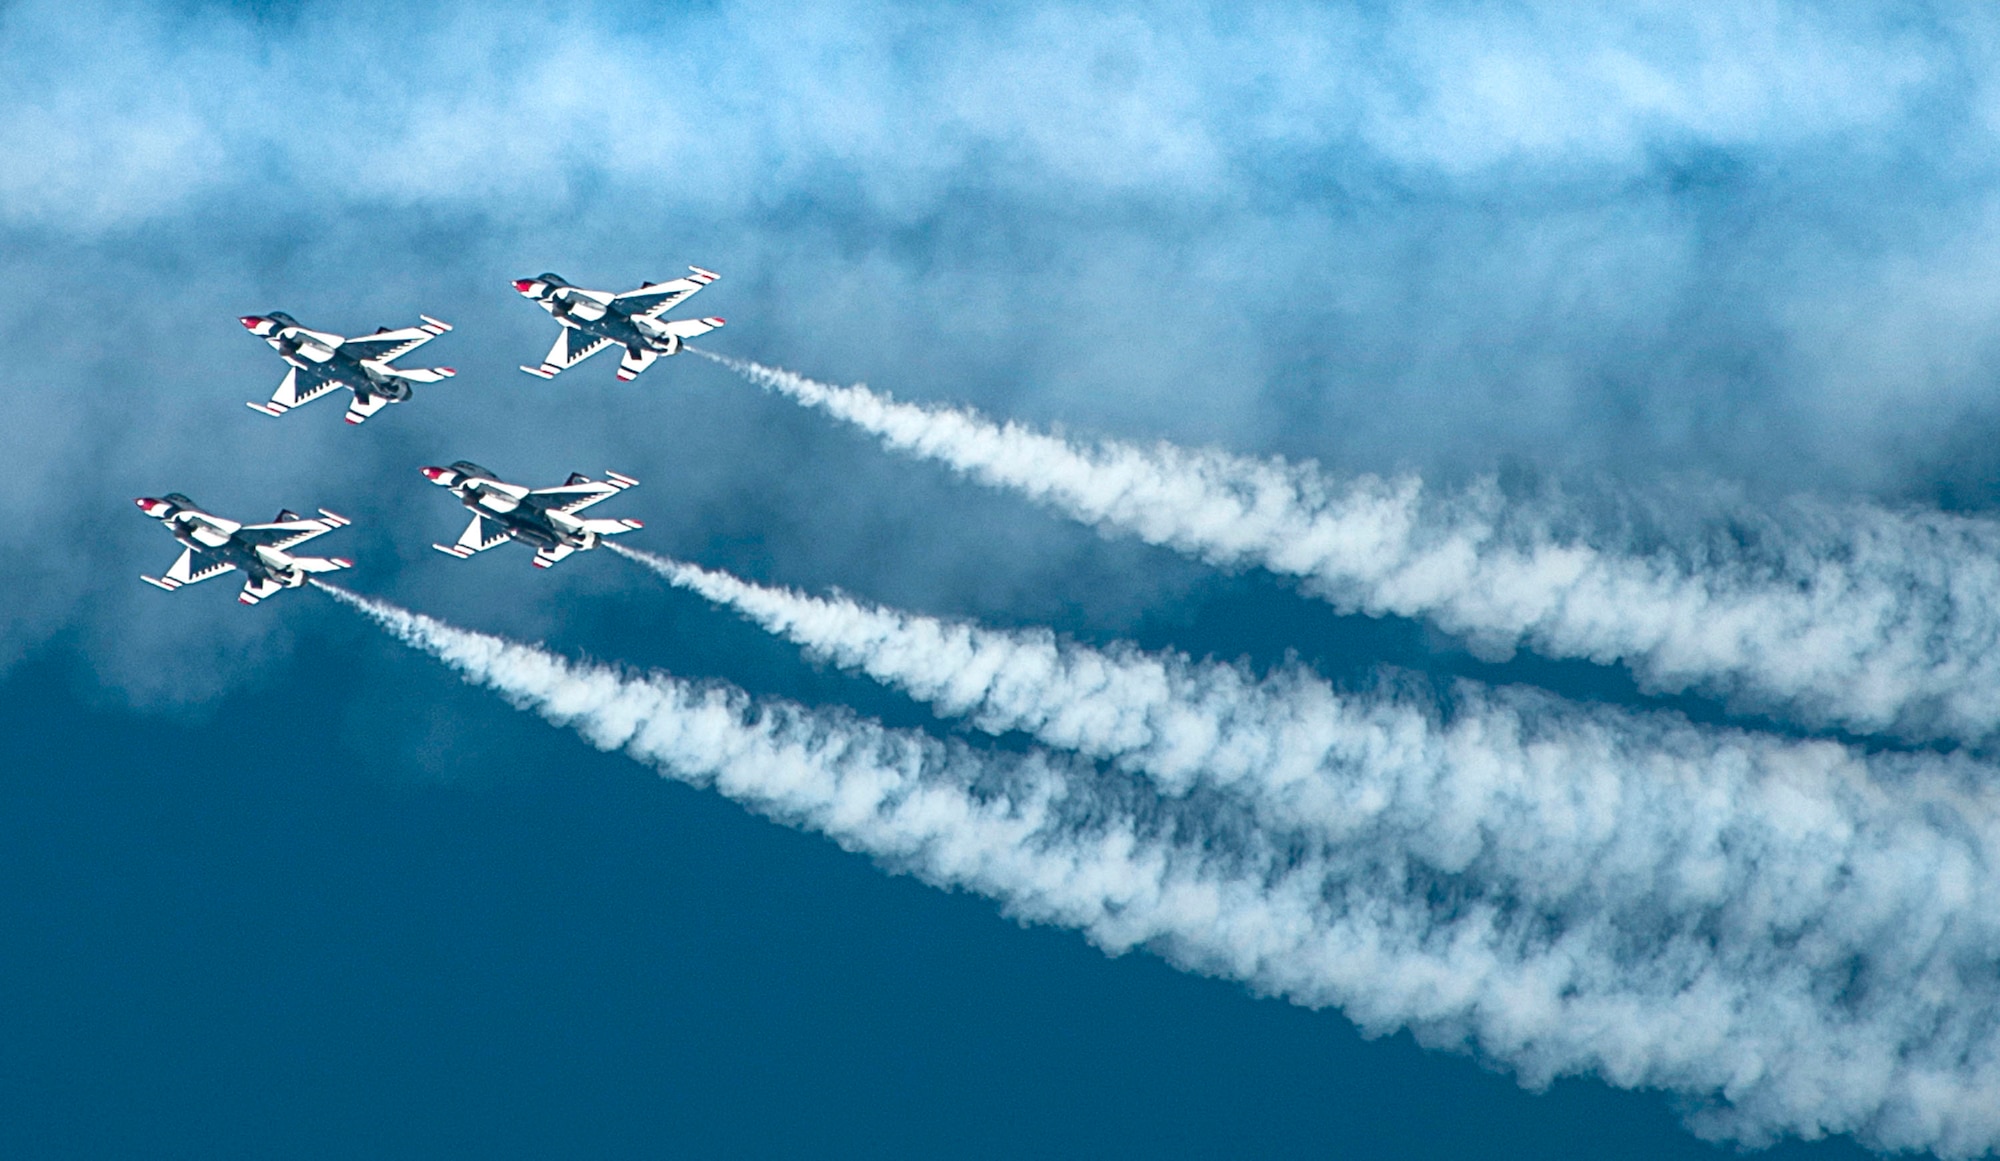 Four U.S. Air Force Thunderbirds Air Demonstration Squadron aircraft fly in a close-air formation during Aviation Nation on Nellis Air Force Base, Nev., Nov. 11, 2016. The Thunderbirds are a demonstration team who display the pride, precision and professionalism of American Airmen. (U.S. Air Force photo by Airman 1st Class Kevin Tanenbaum/Released)